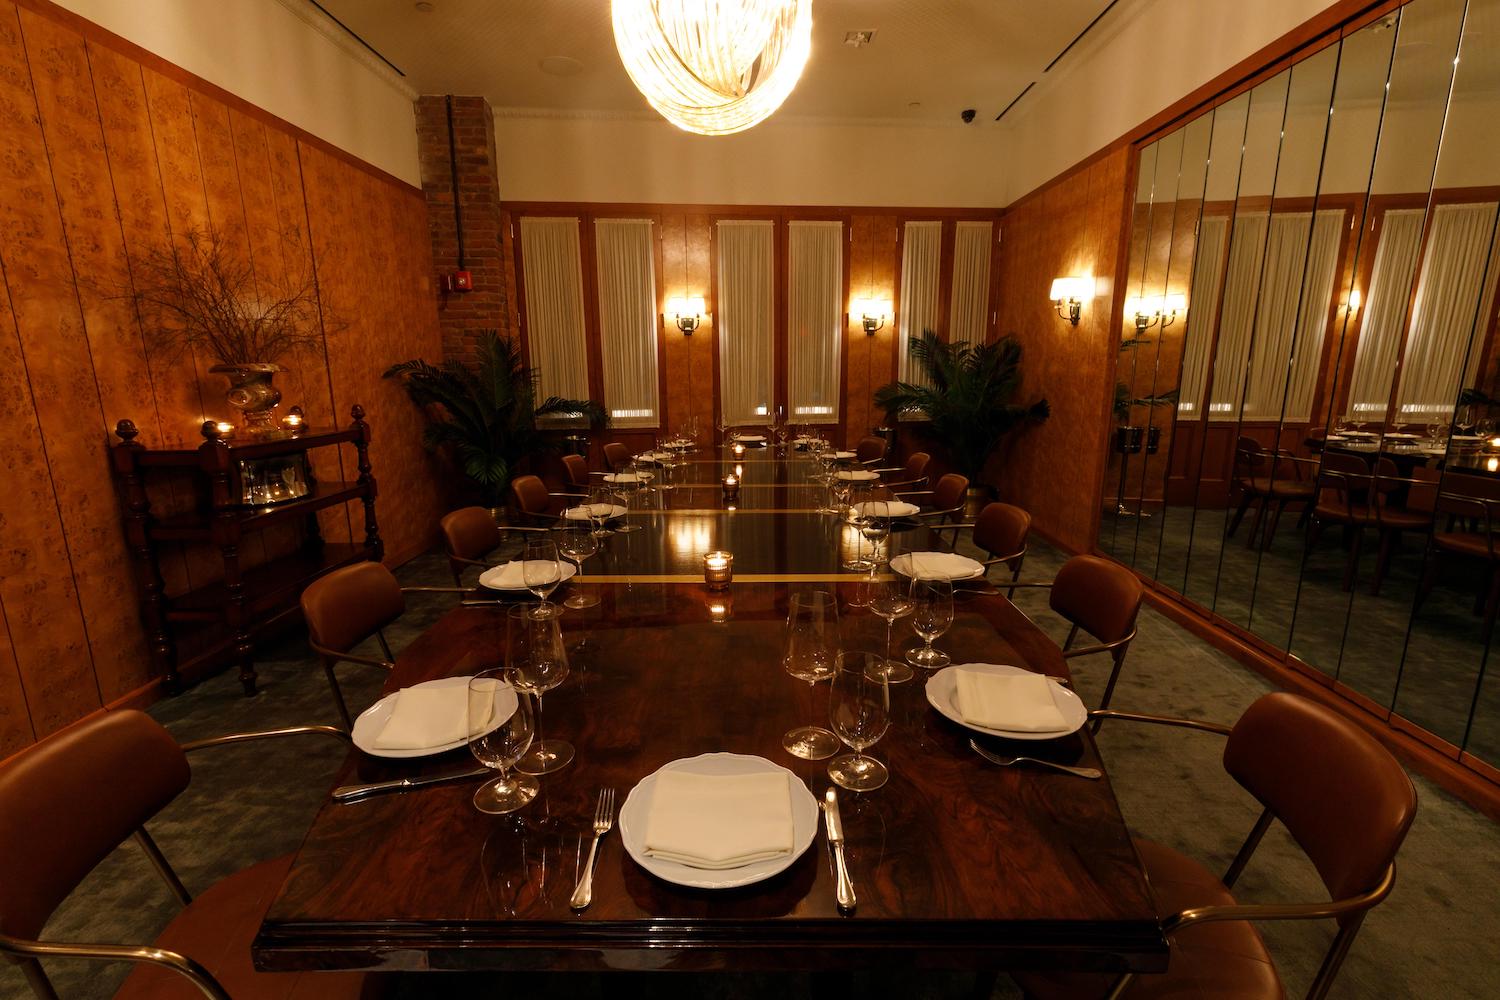 Torrisi's private dining room